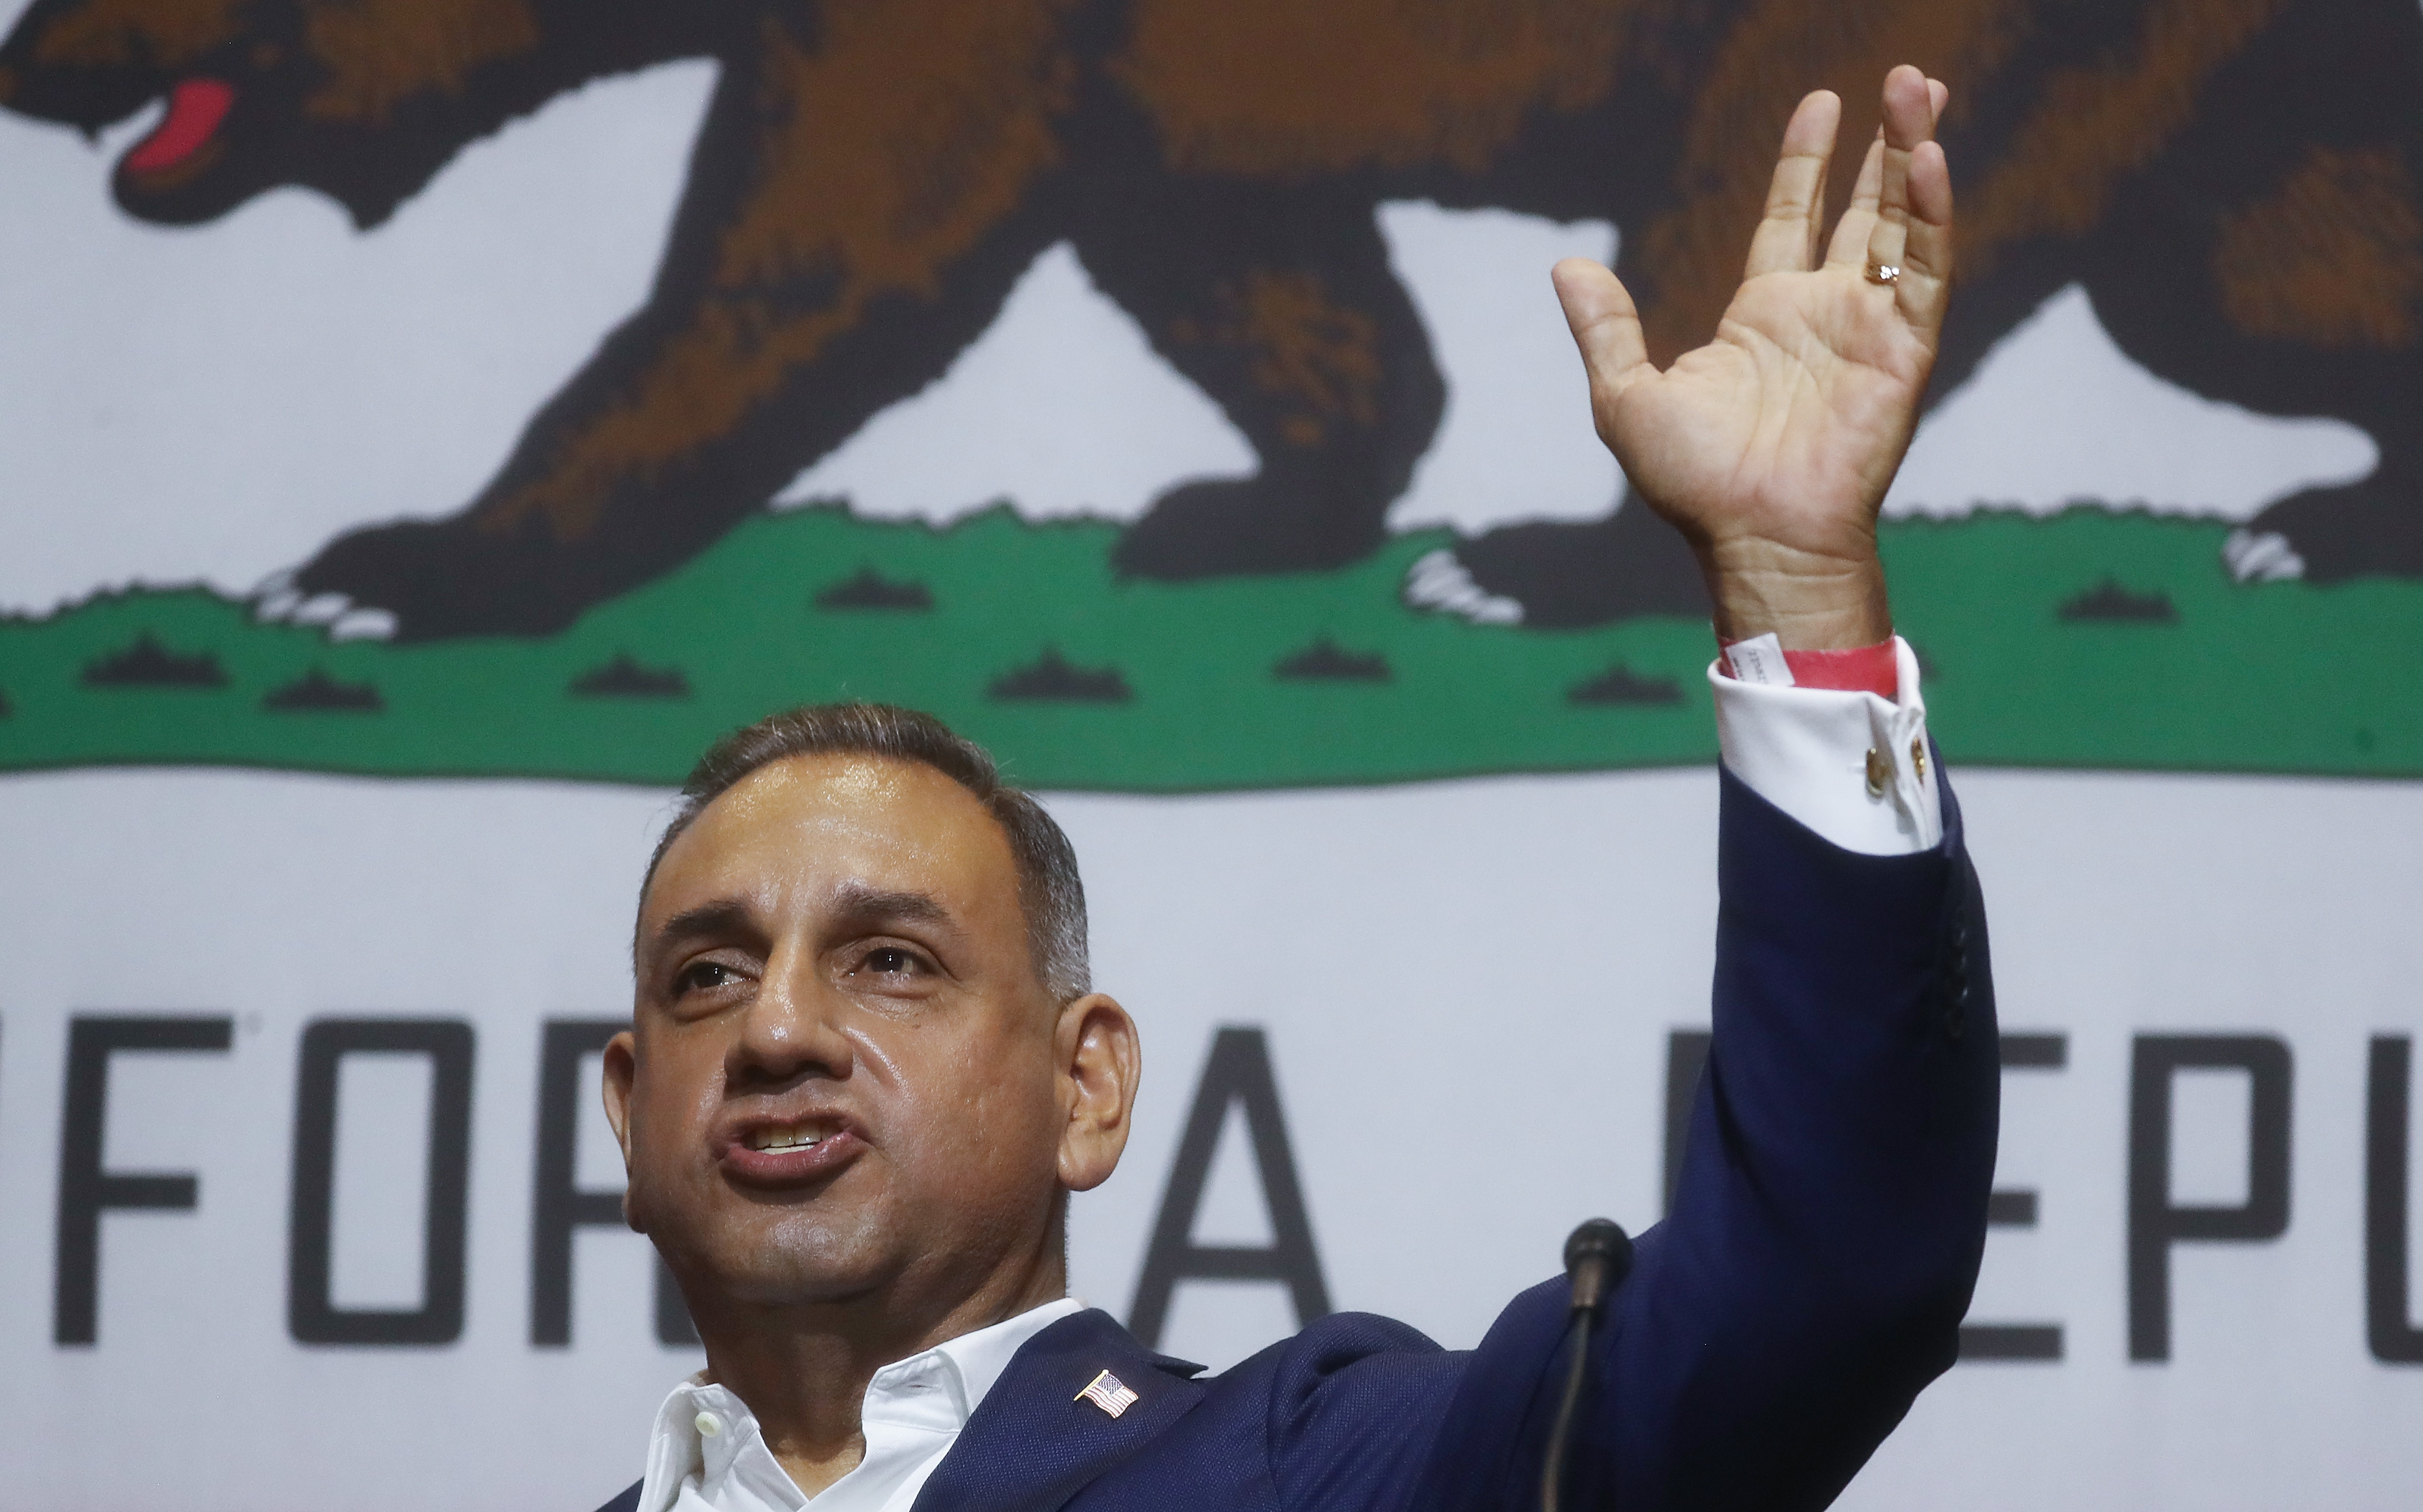 Gil Cisneros speaks at a mid-term elections rally on October 4, 2018.